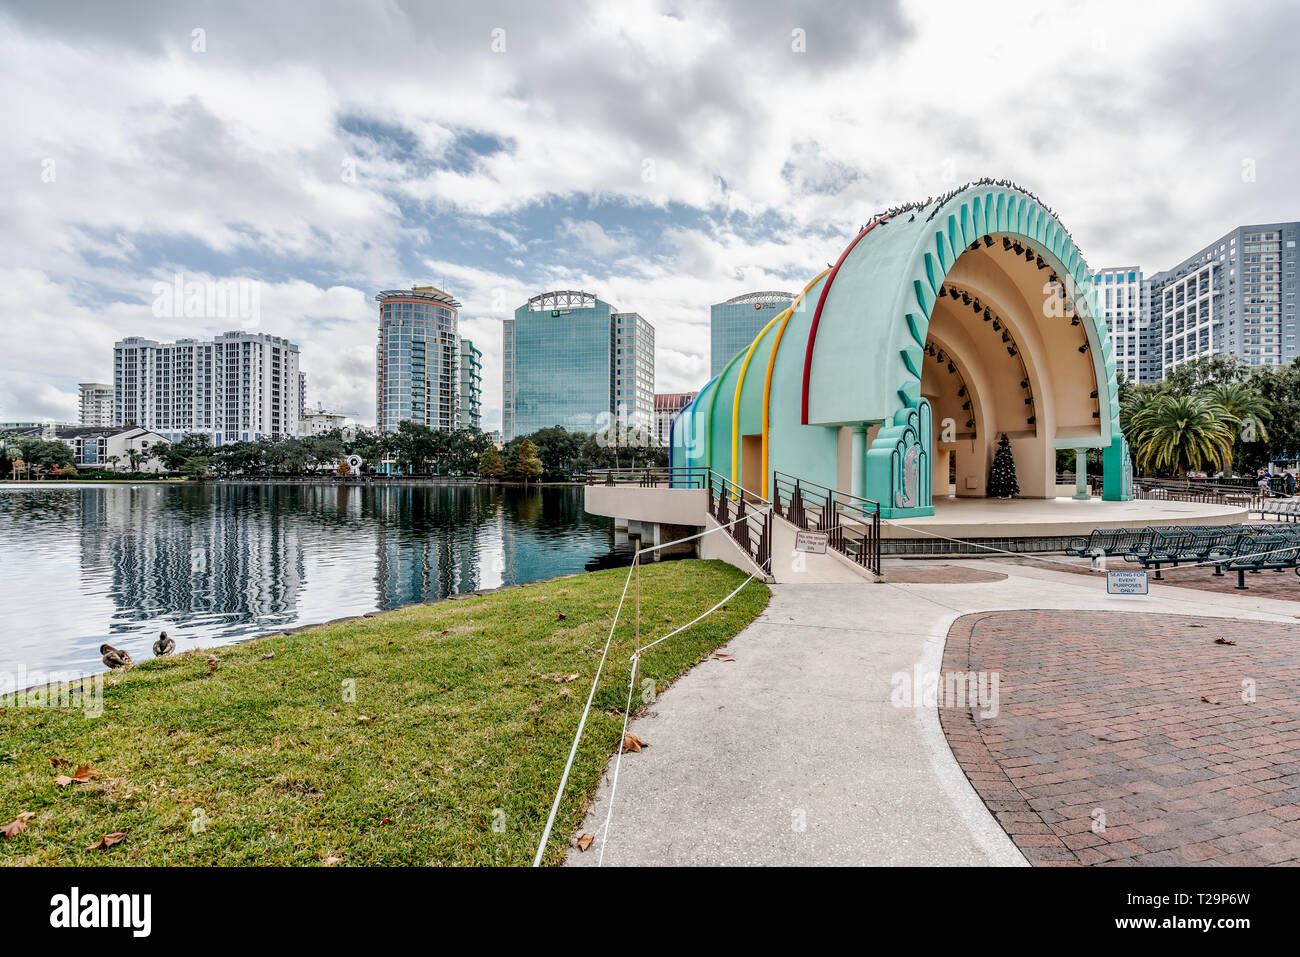 ORLANDO, FLORIDA, USA - DECEMBER, 2018: The rainbow painted amphitheater in remembrance of the victims who died in the Pulse tragedy, at Eola Park, Do Stock Photo